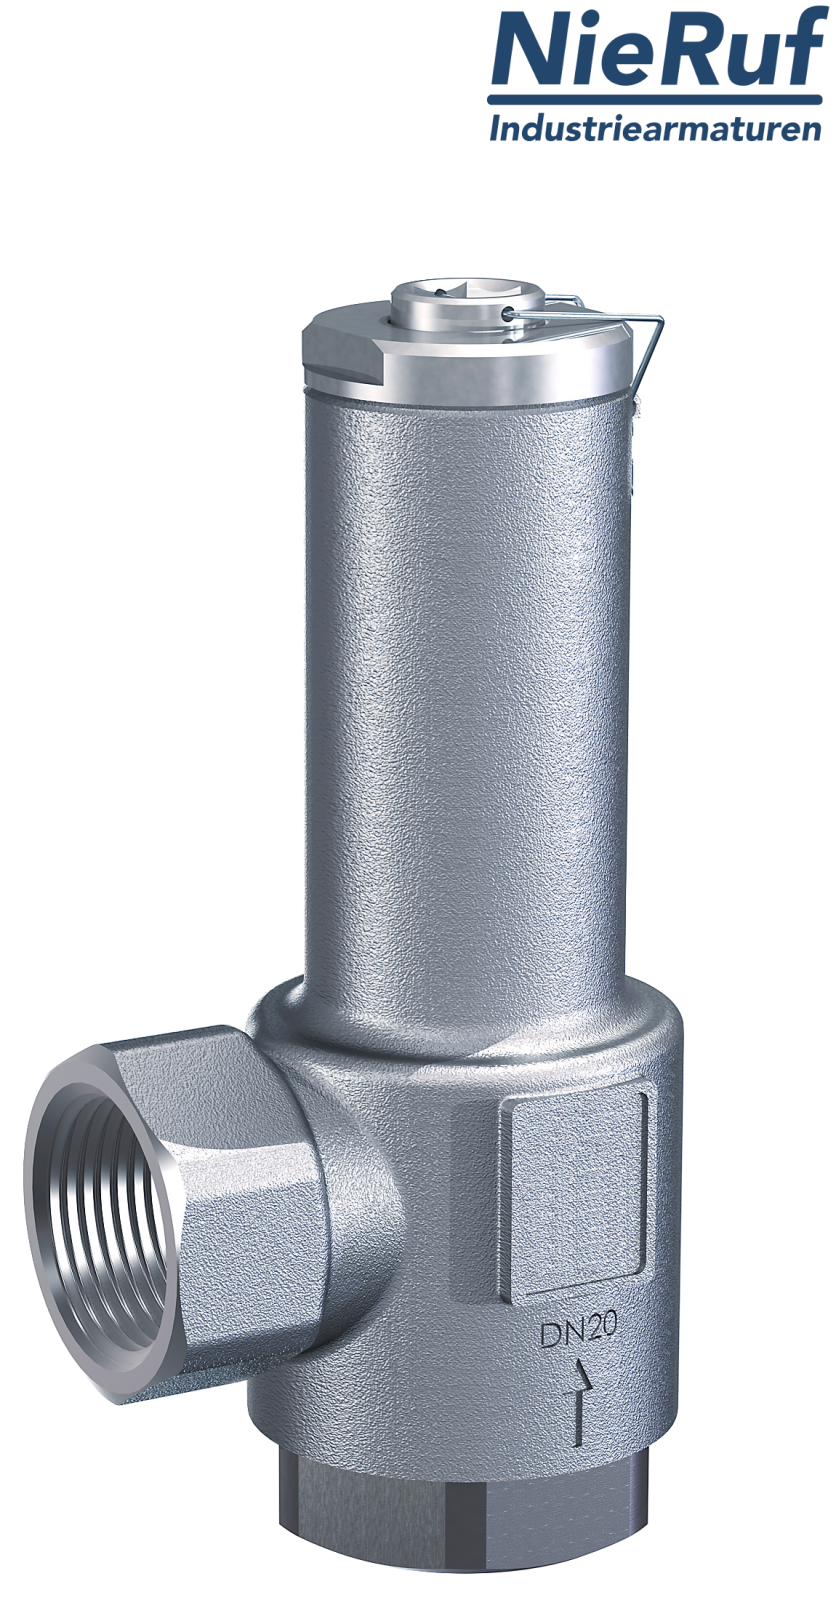 angle-type overflow valve 1 1/2" inch fm UV04 stainless steel AISI 316L 0,5 - 2,5 bar